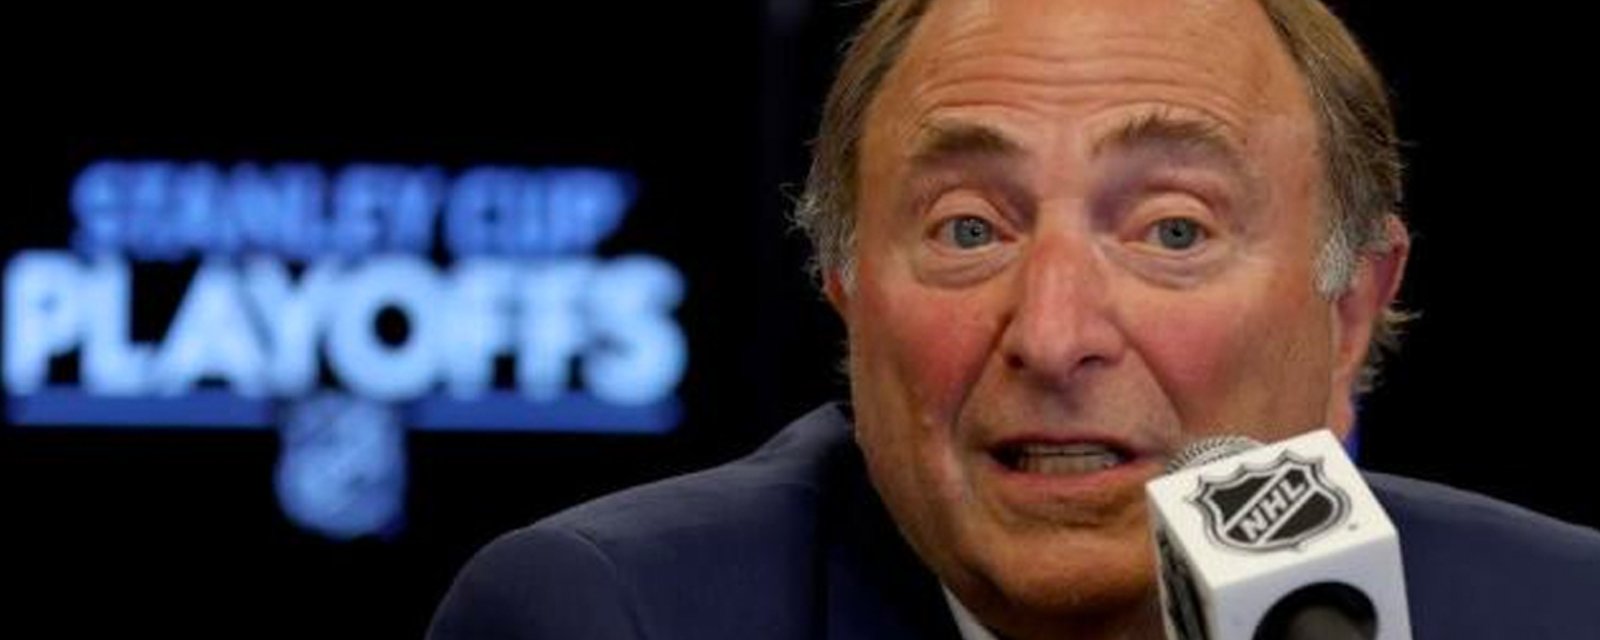 Bettman supports Tampa's use of “loopholes” for what he calls “cap management”